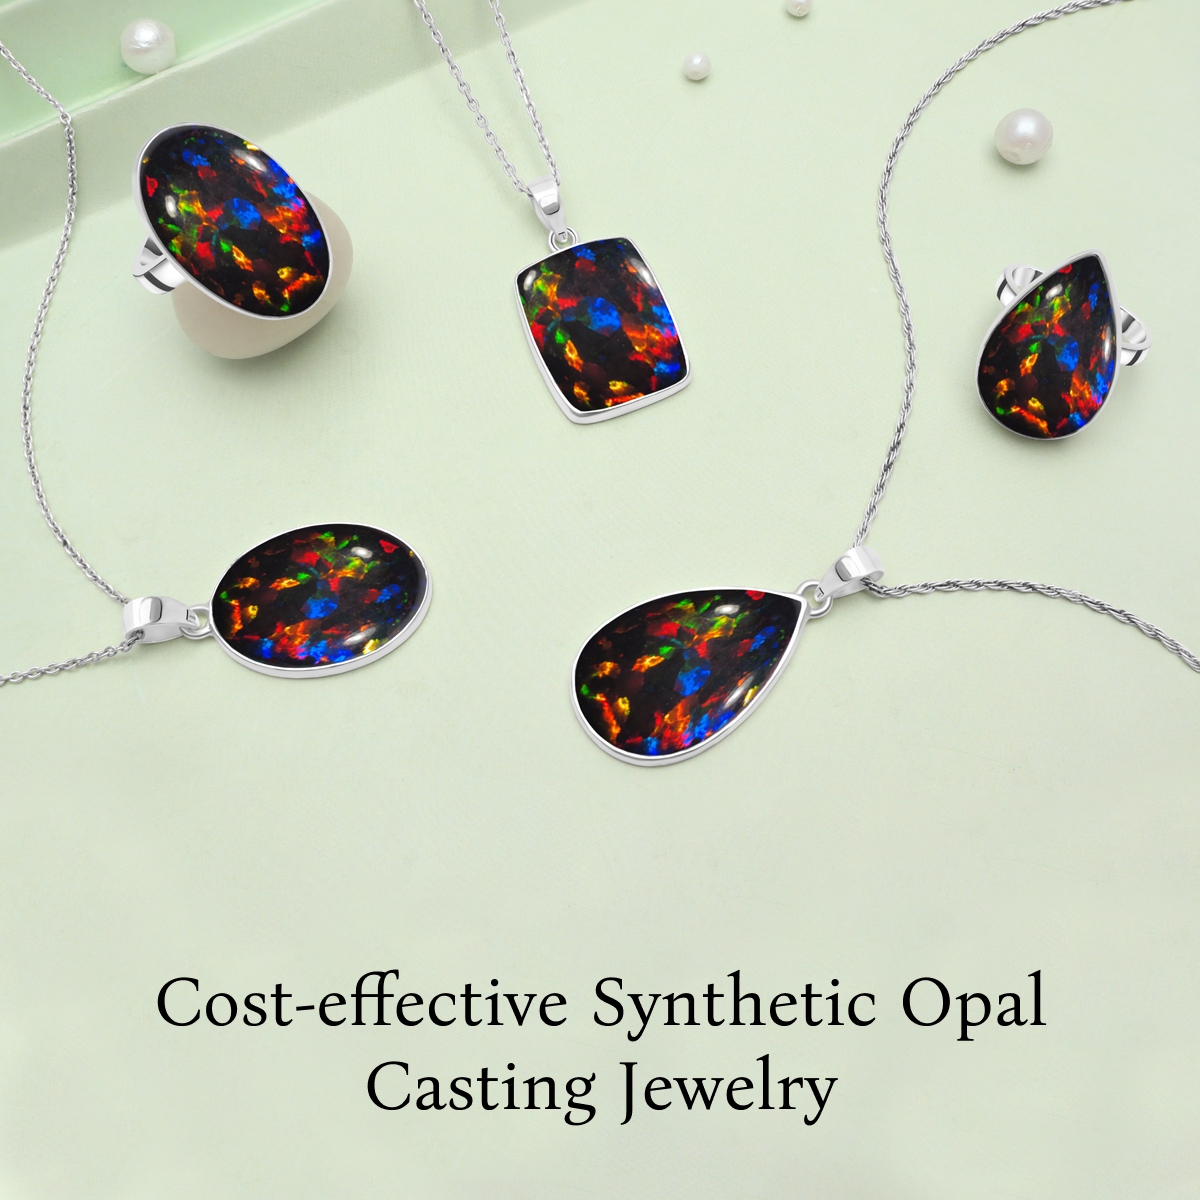 Price of Synthetic Opal Casting Jewelry Collection